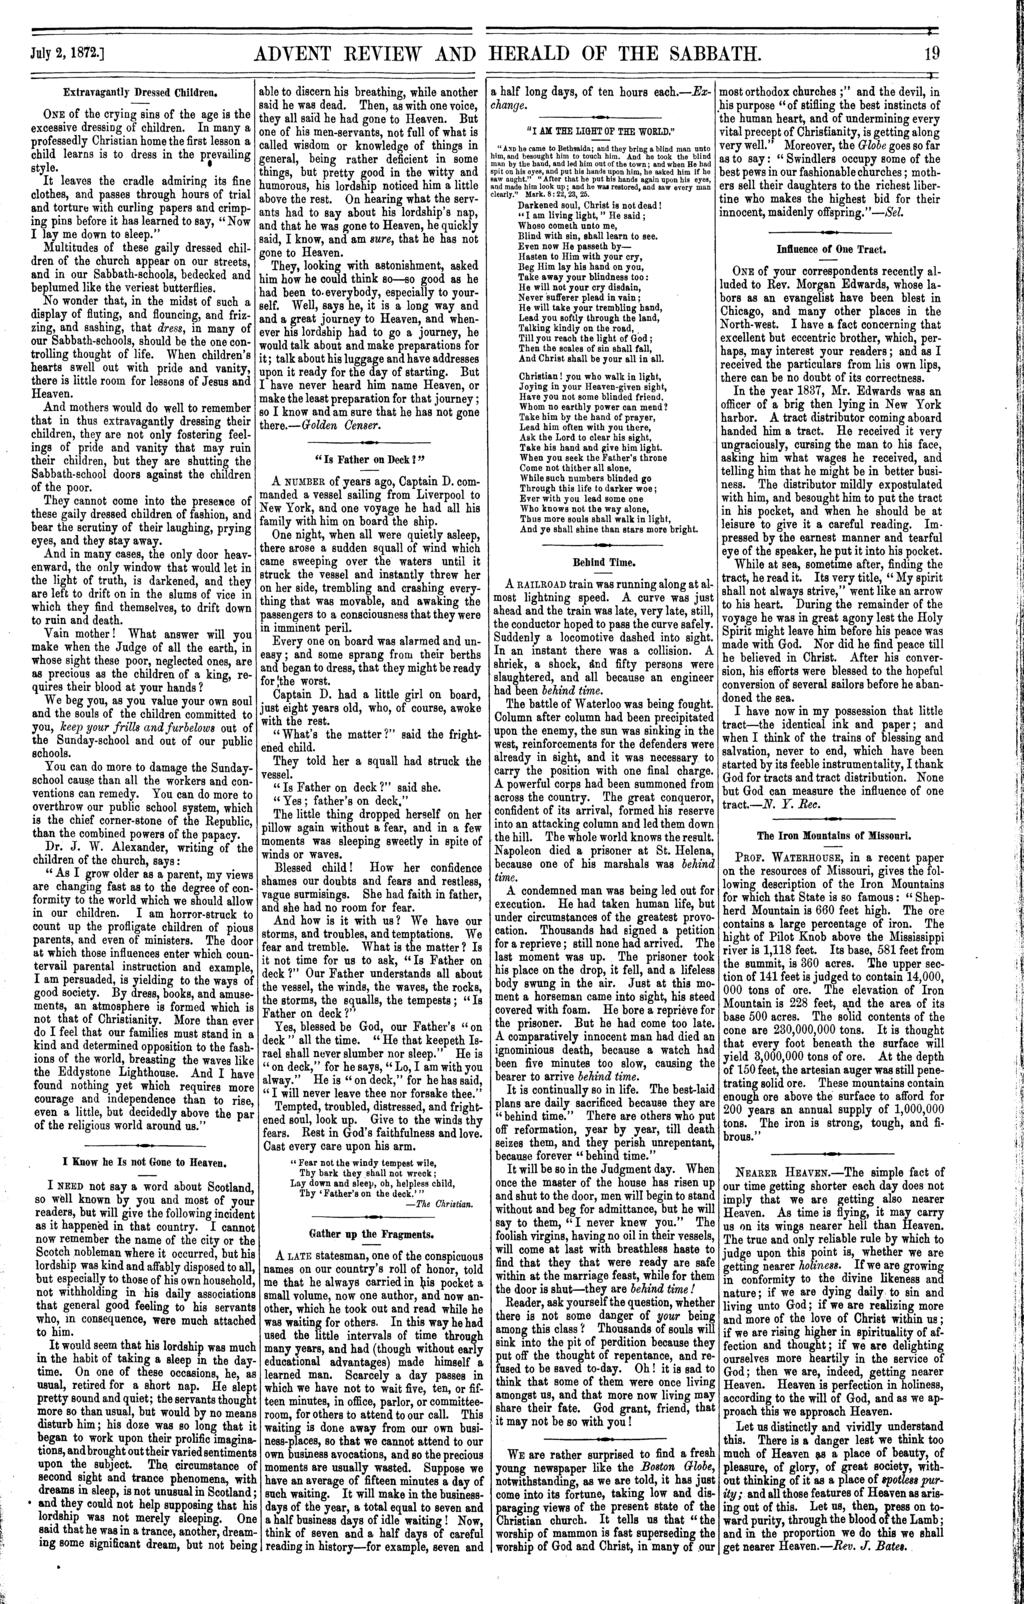 . I July 2, 1872.] ADVENT REVIEW AND HERALD OF THE SABBATH. Extravagantly Dresse Cilren. ONE of te crying sins of te age is te excessive ressing of cilren. In many a professely C?